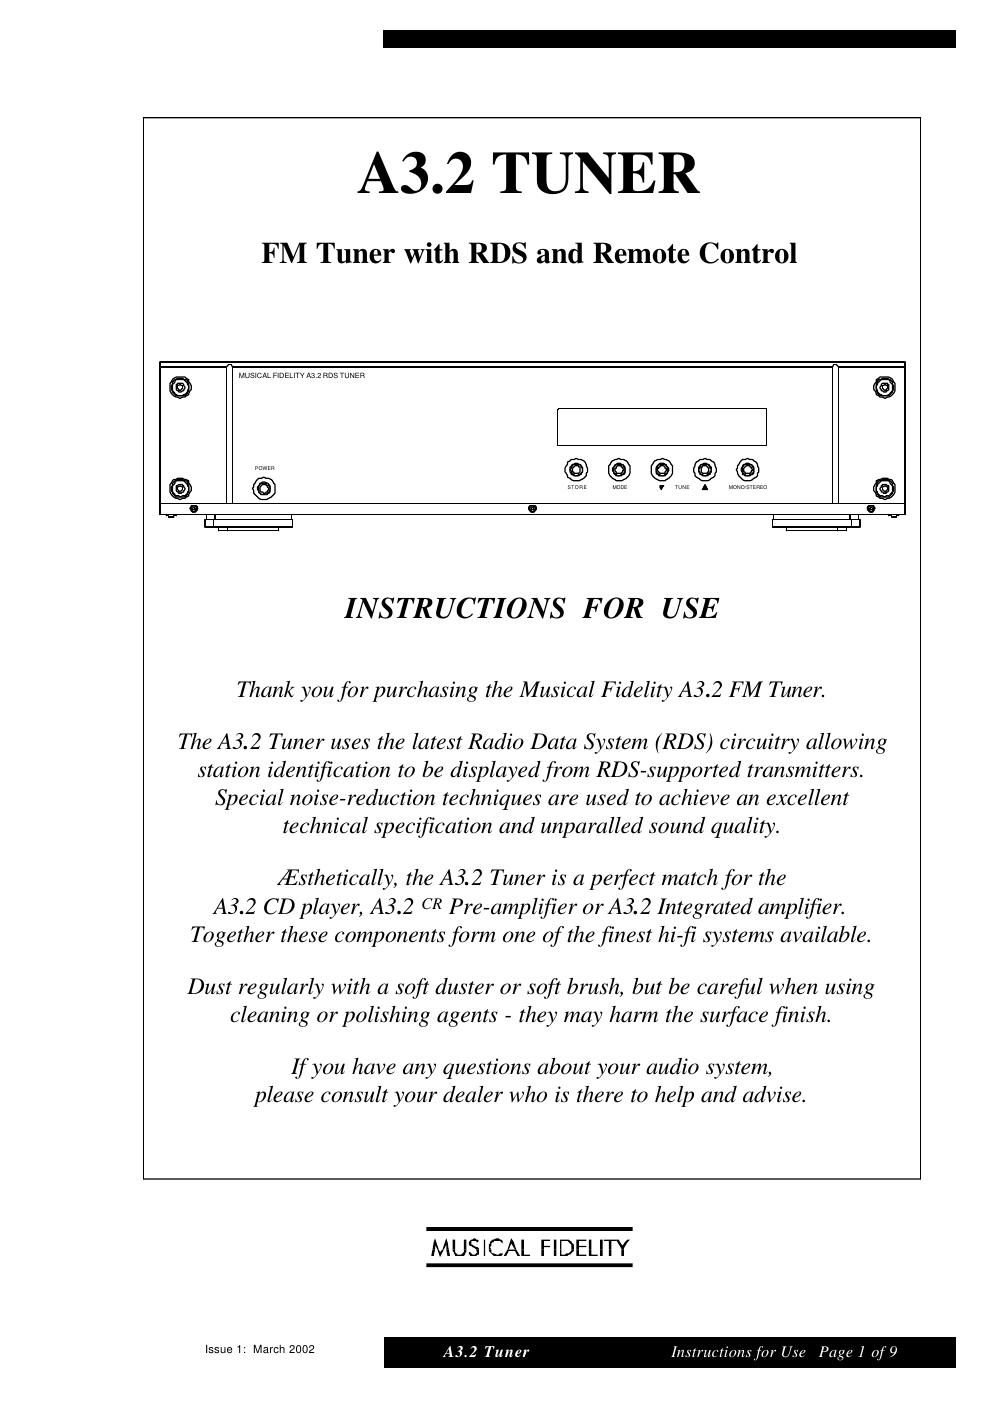 musical fidelity a 3 2 tuner owners manual